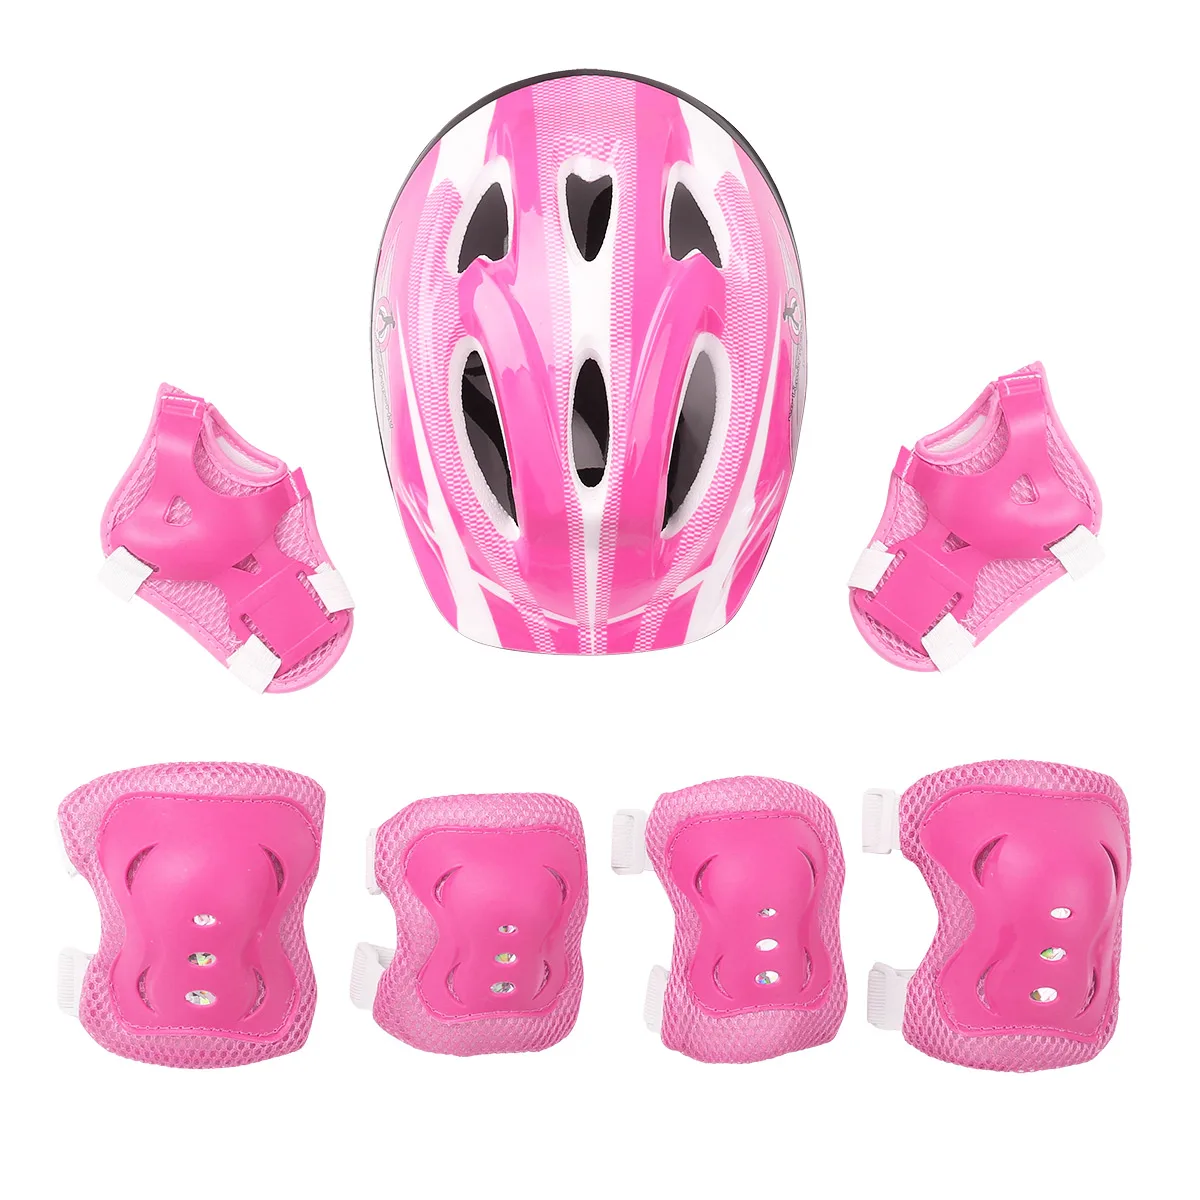 Details about   7Pcs Protective Gear Helmet Elbow Knee Pads Adult Kids Cycling Skate Skateboard 